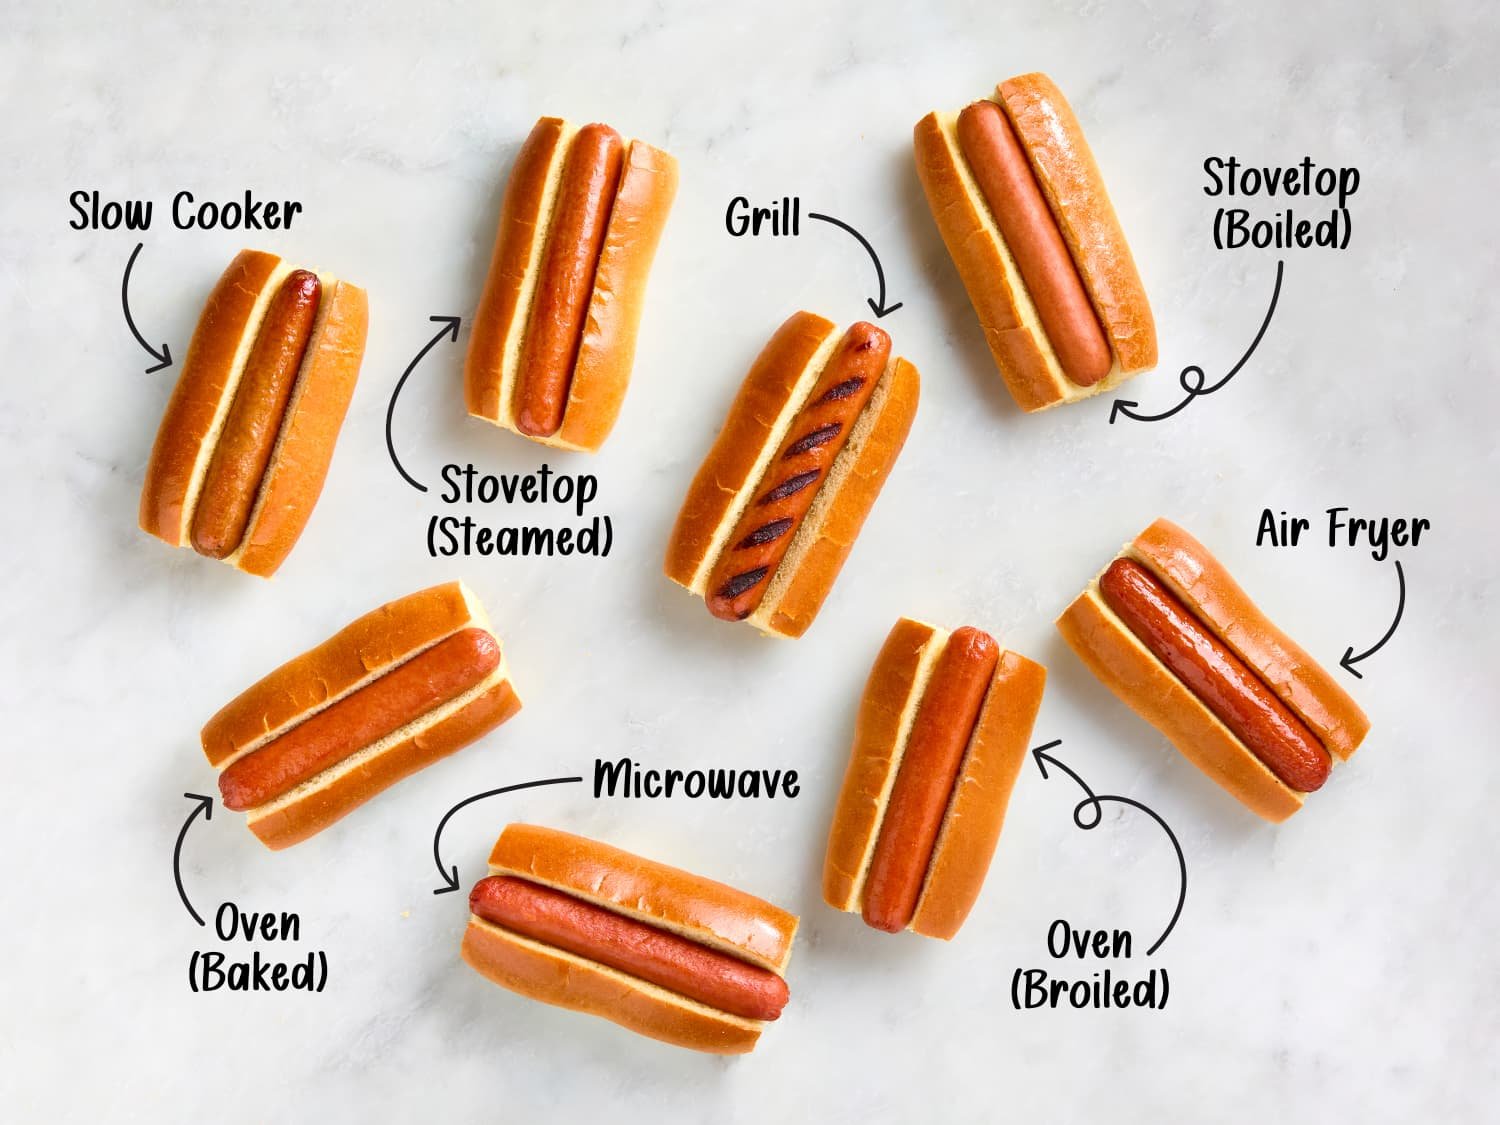 I Tried 8 Methods of Cooking Hot Dogs and Found an Absolute Winner (No Other Came Close)